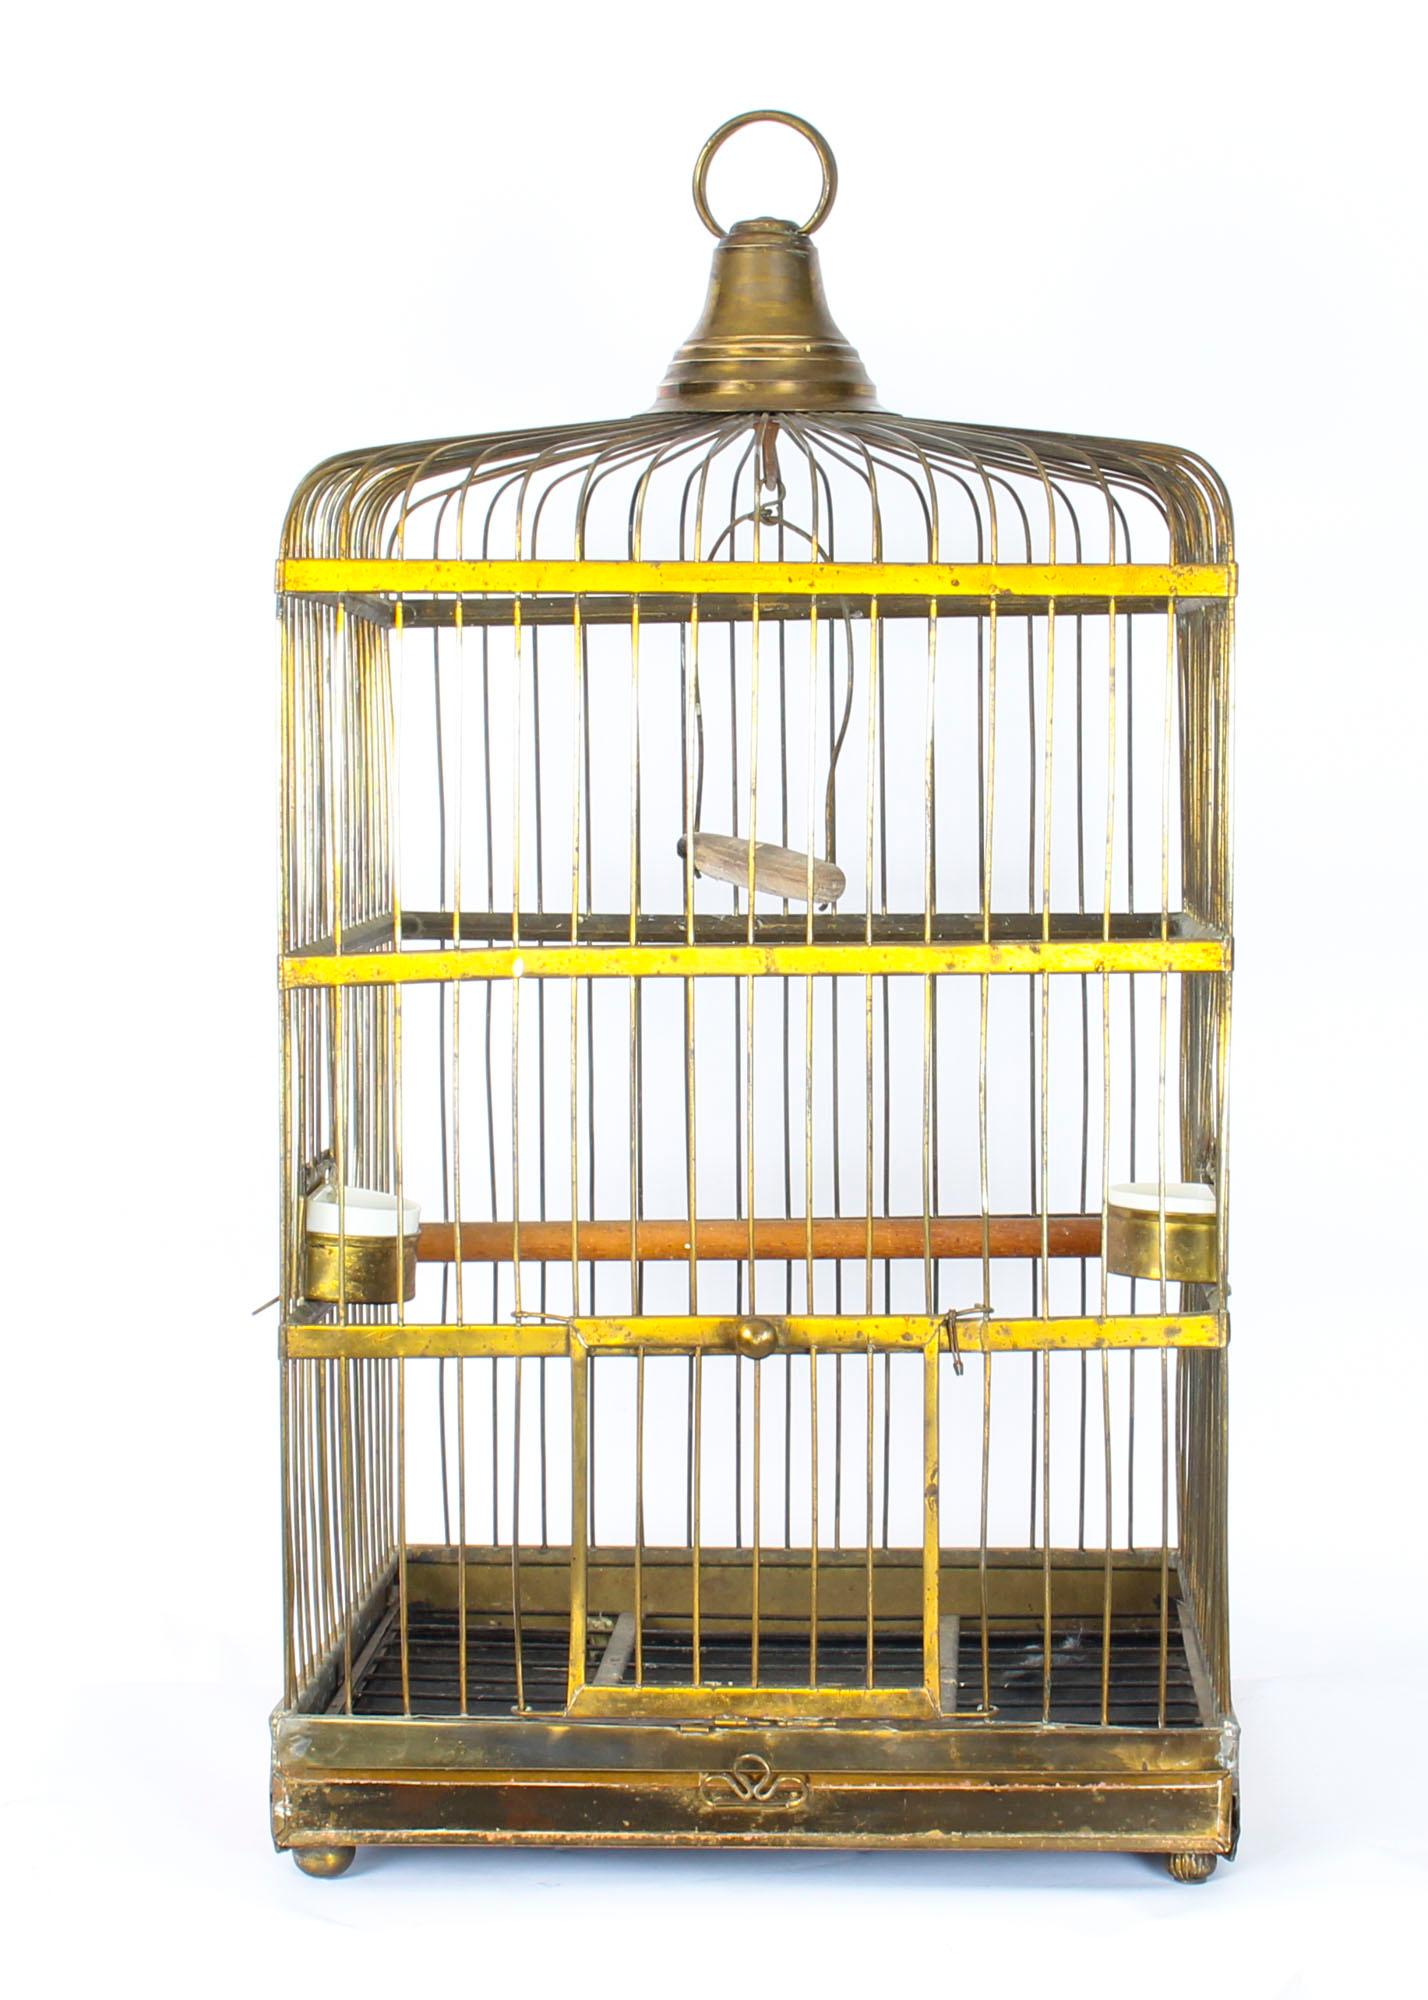 This is a very decorative antique French heavy brass parrot cage, circa 1880 in date.

The square shaped cage features fine brass wirework with a slightly domed top fitted with a central brass ring handle.

The interior has brass half round